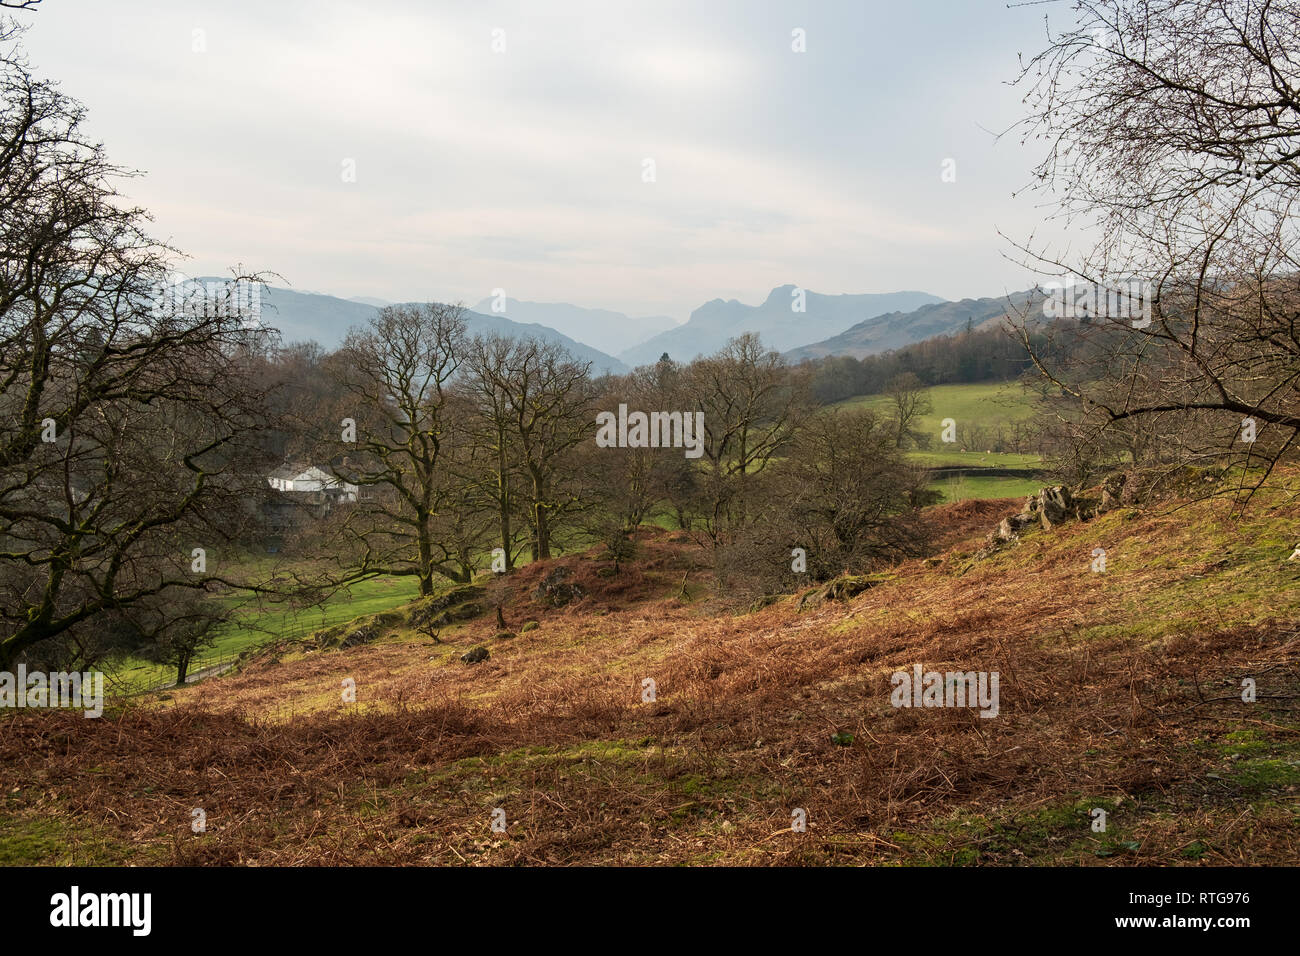 The Langdale Pikes seen above sunlight falling on trees and brown bracken covering the lower slopes of Loughrigg Fell, Lake District, UK Stock Photo